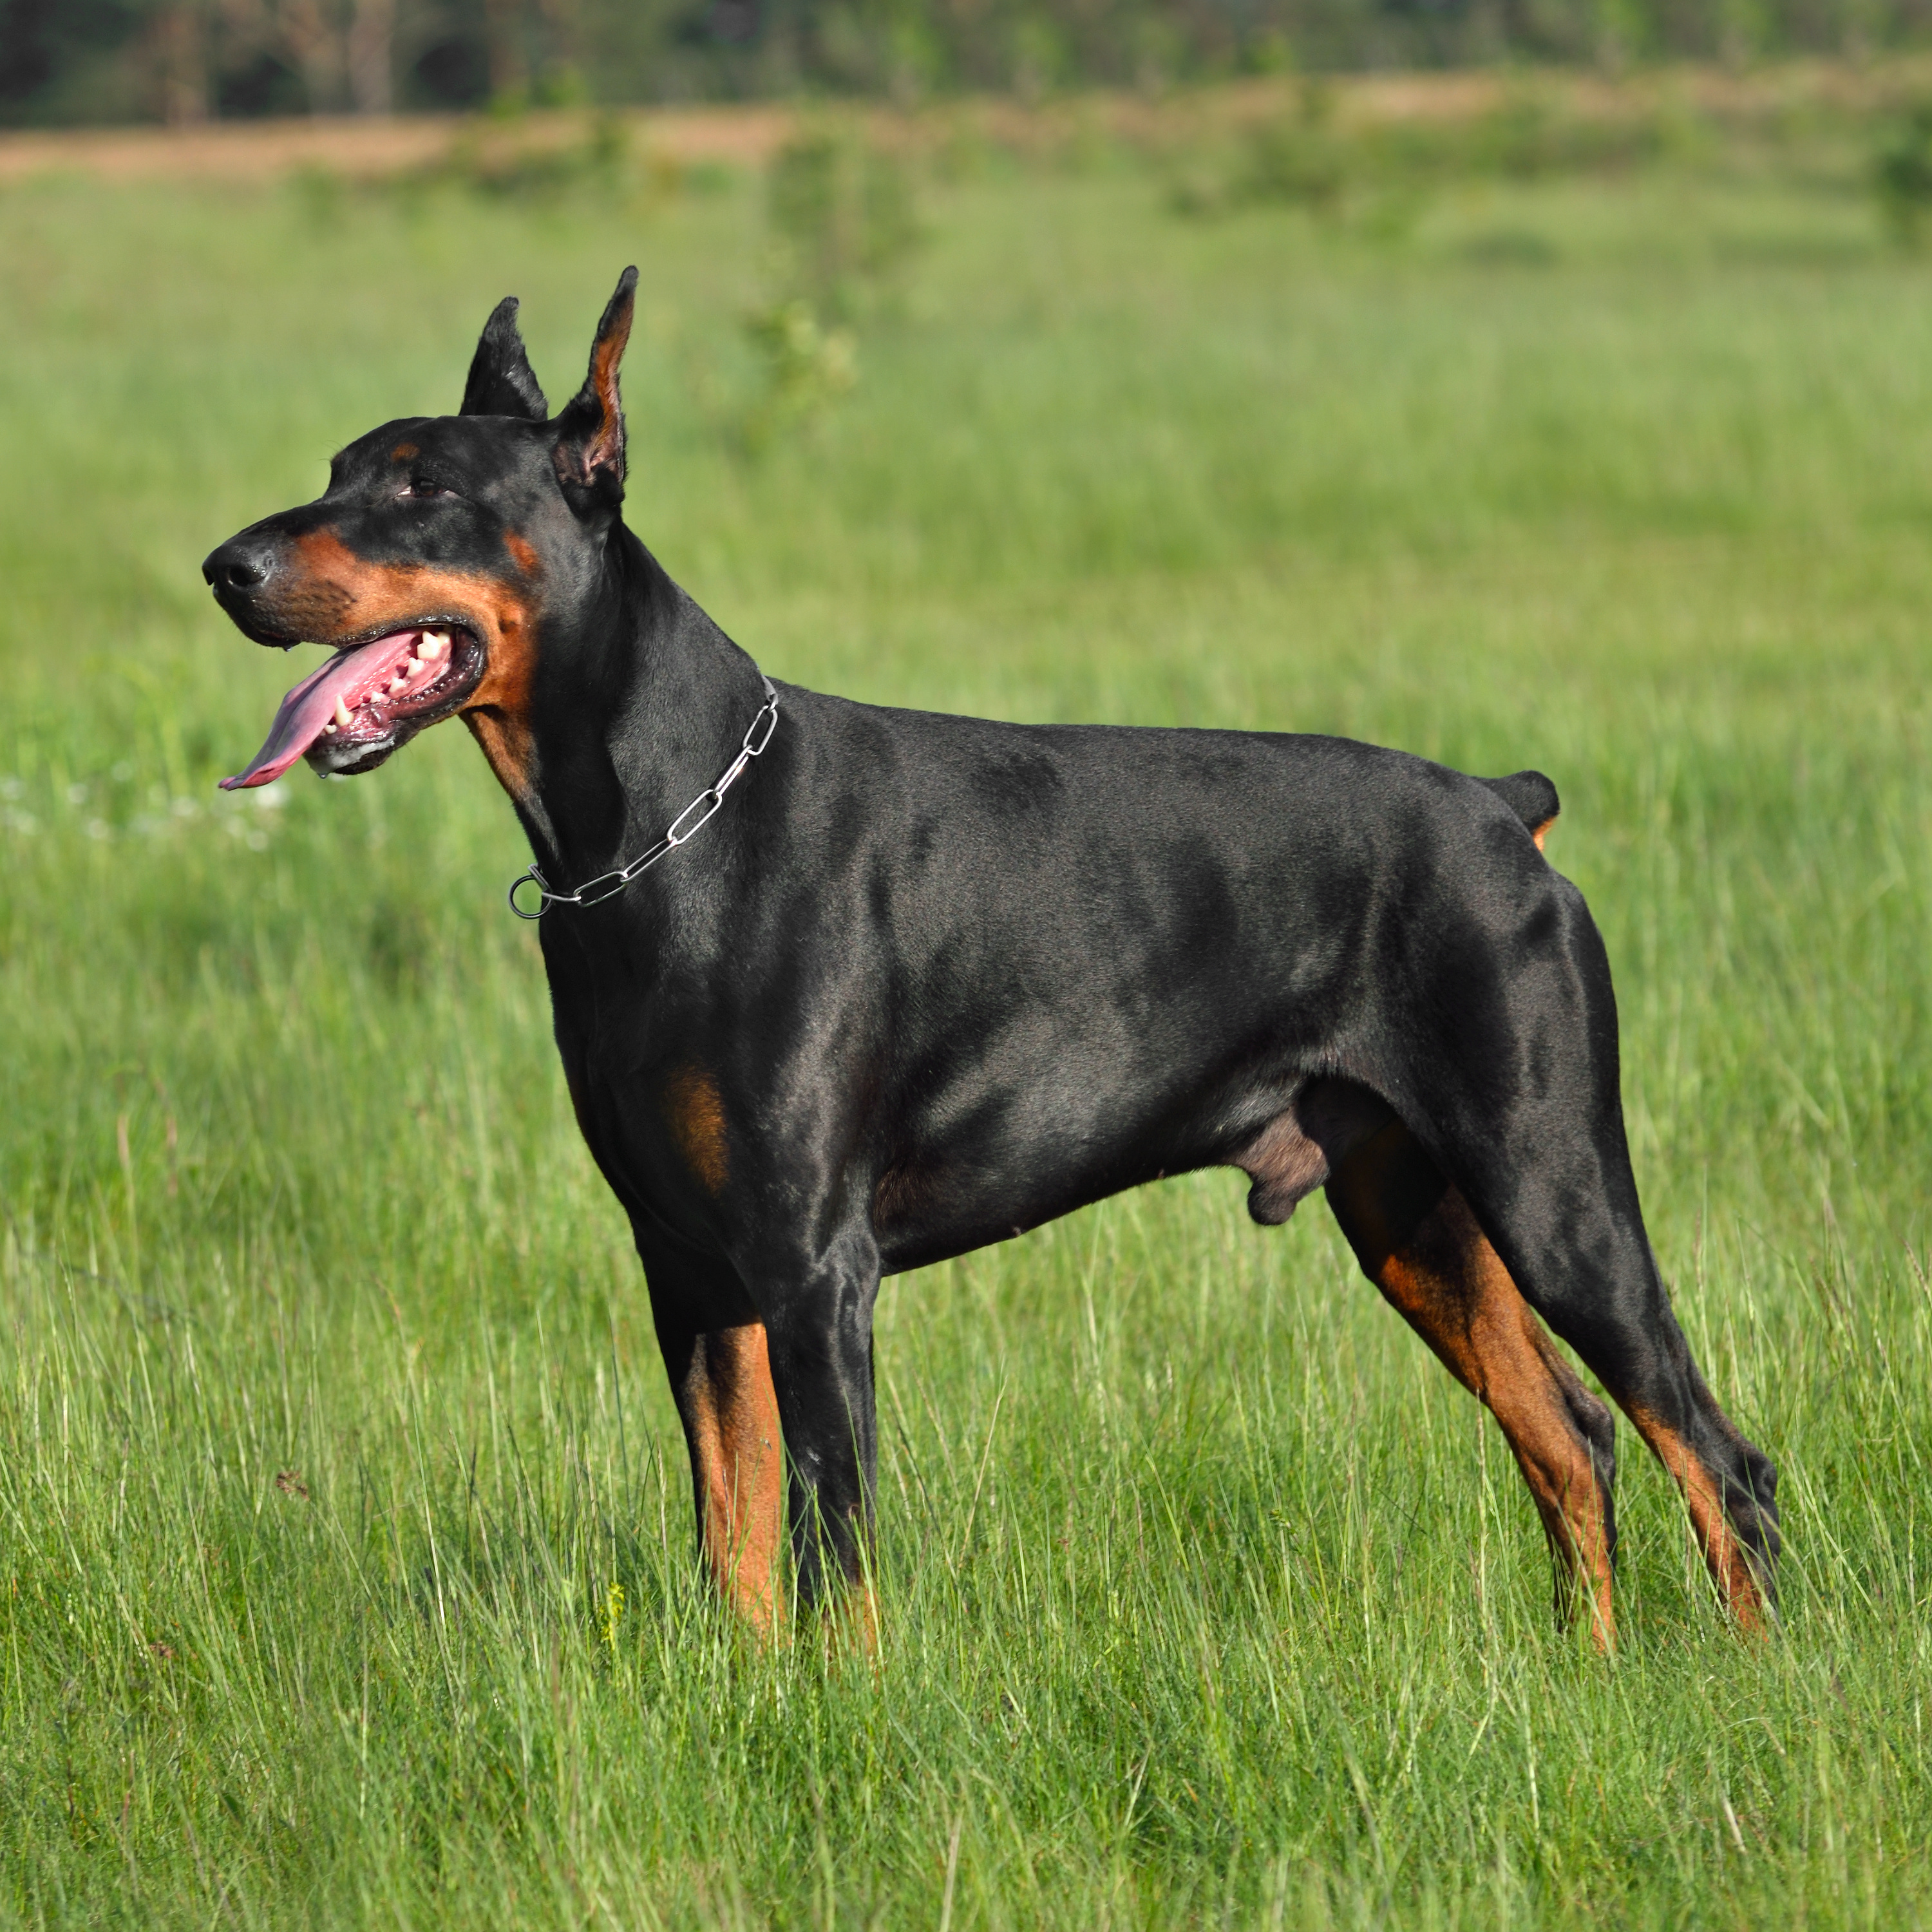 Dog Training Elite has expert Doberman training in Fort Worth, TX
																															 that are experienced in a variety of positive training methods for Dobermans.